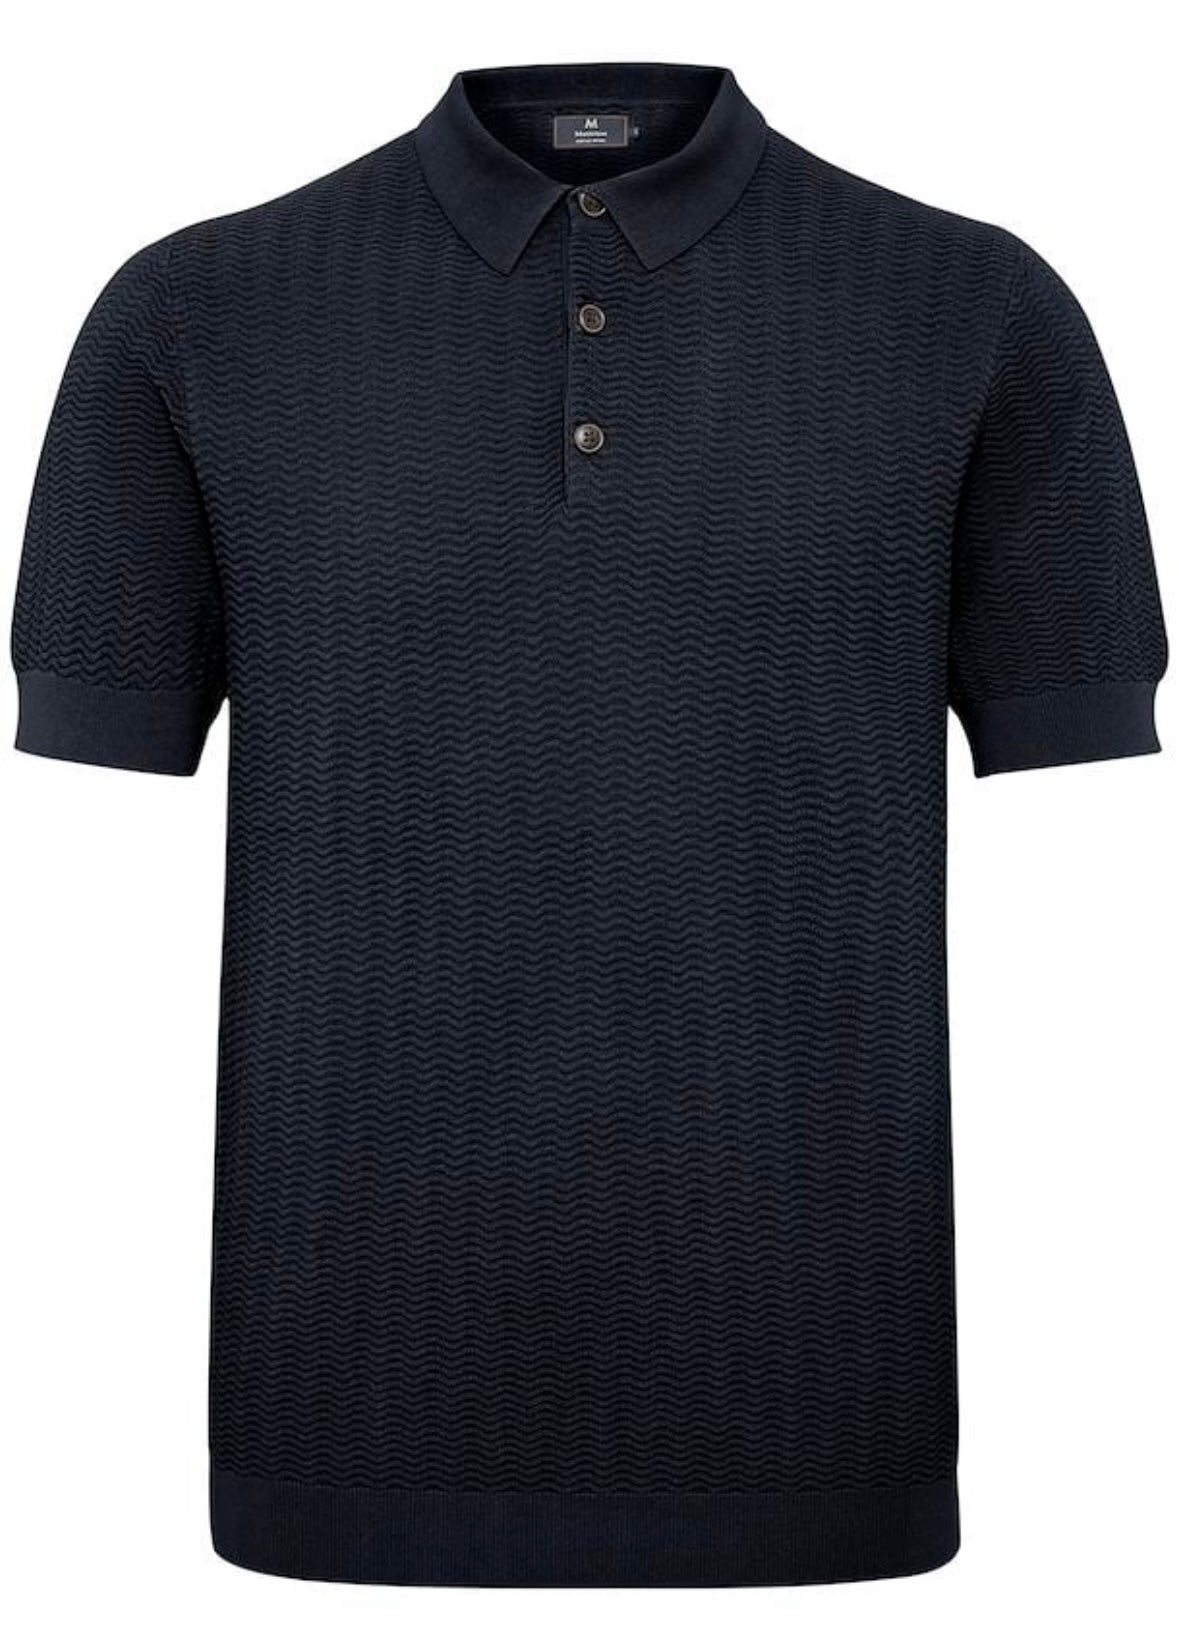 Matinique Polo Knit Heritage - Dark Navy